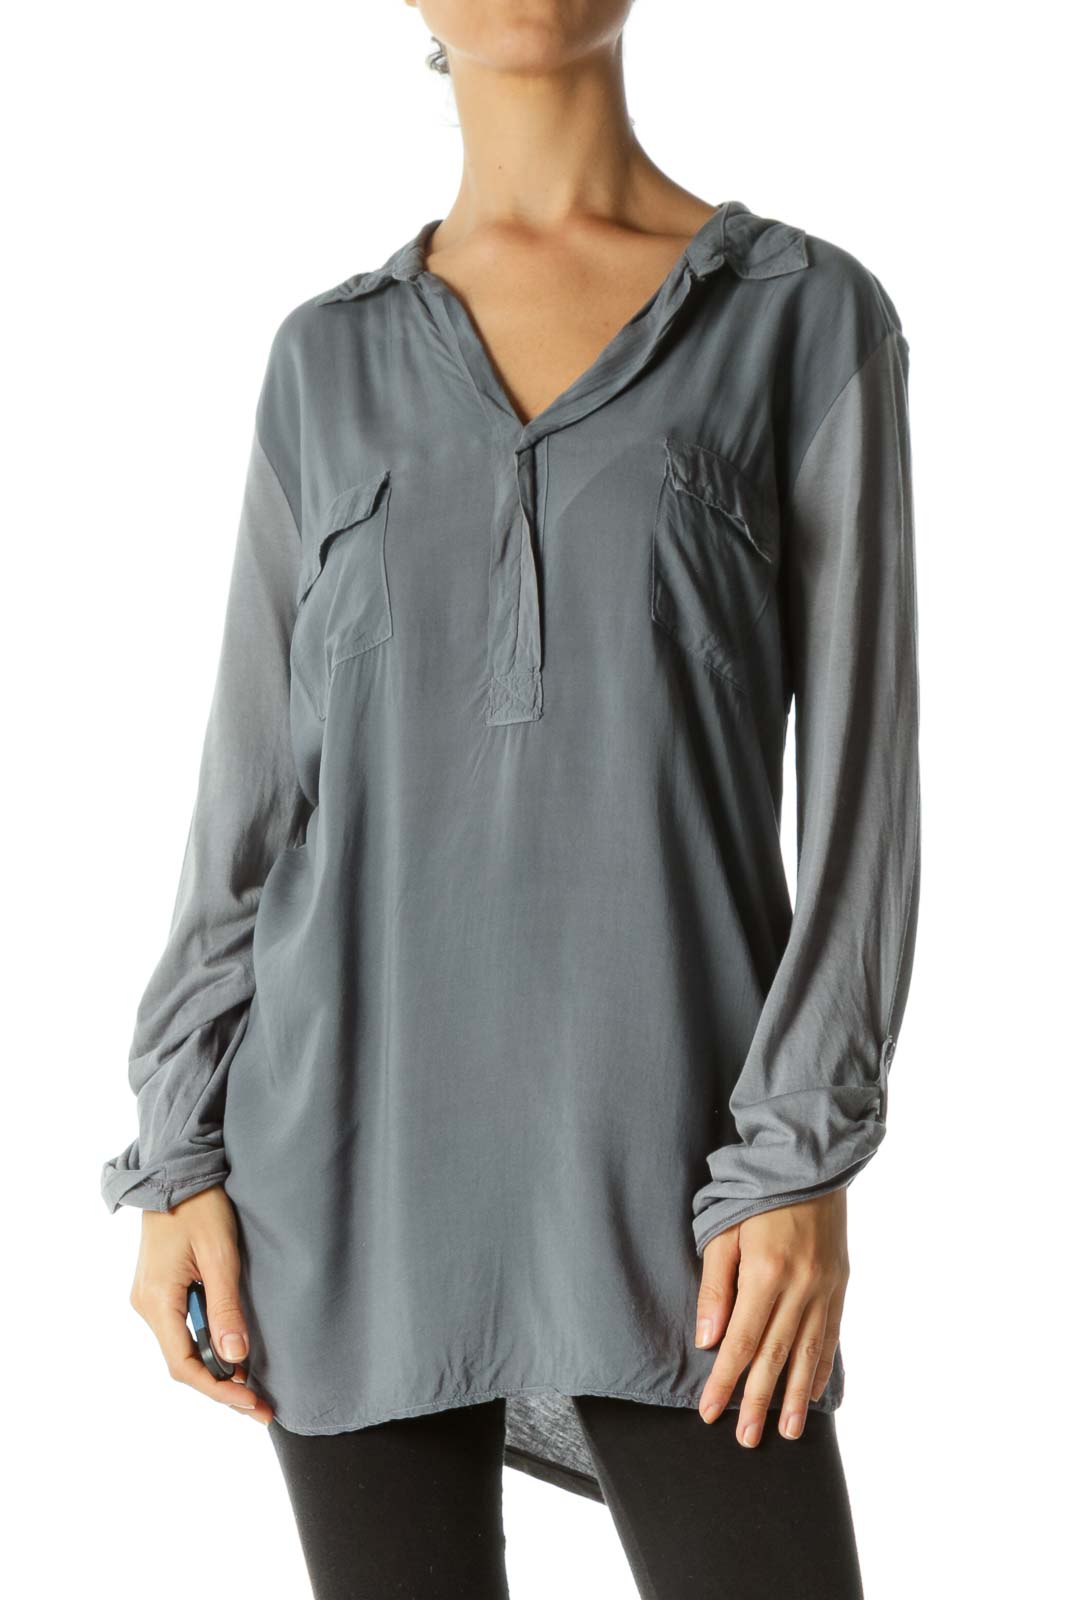 Gray Supima Cotton Blend Pocketed V-Neck Long Sleeve Light Top Front